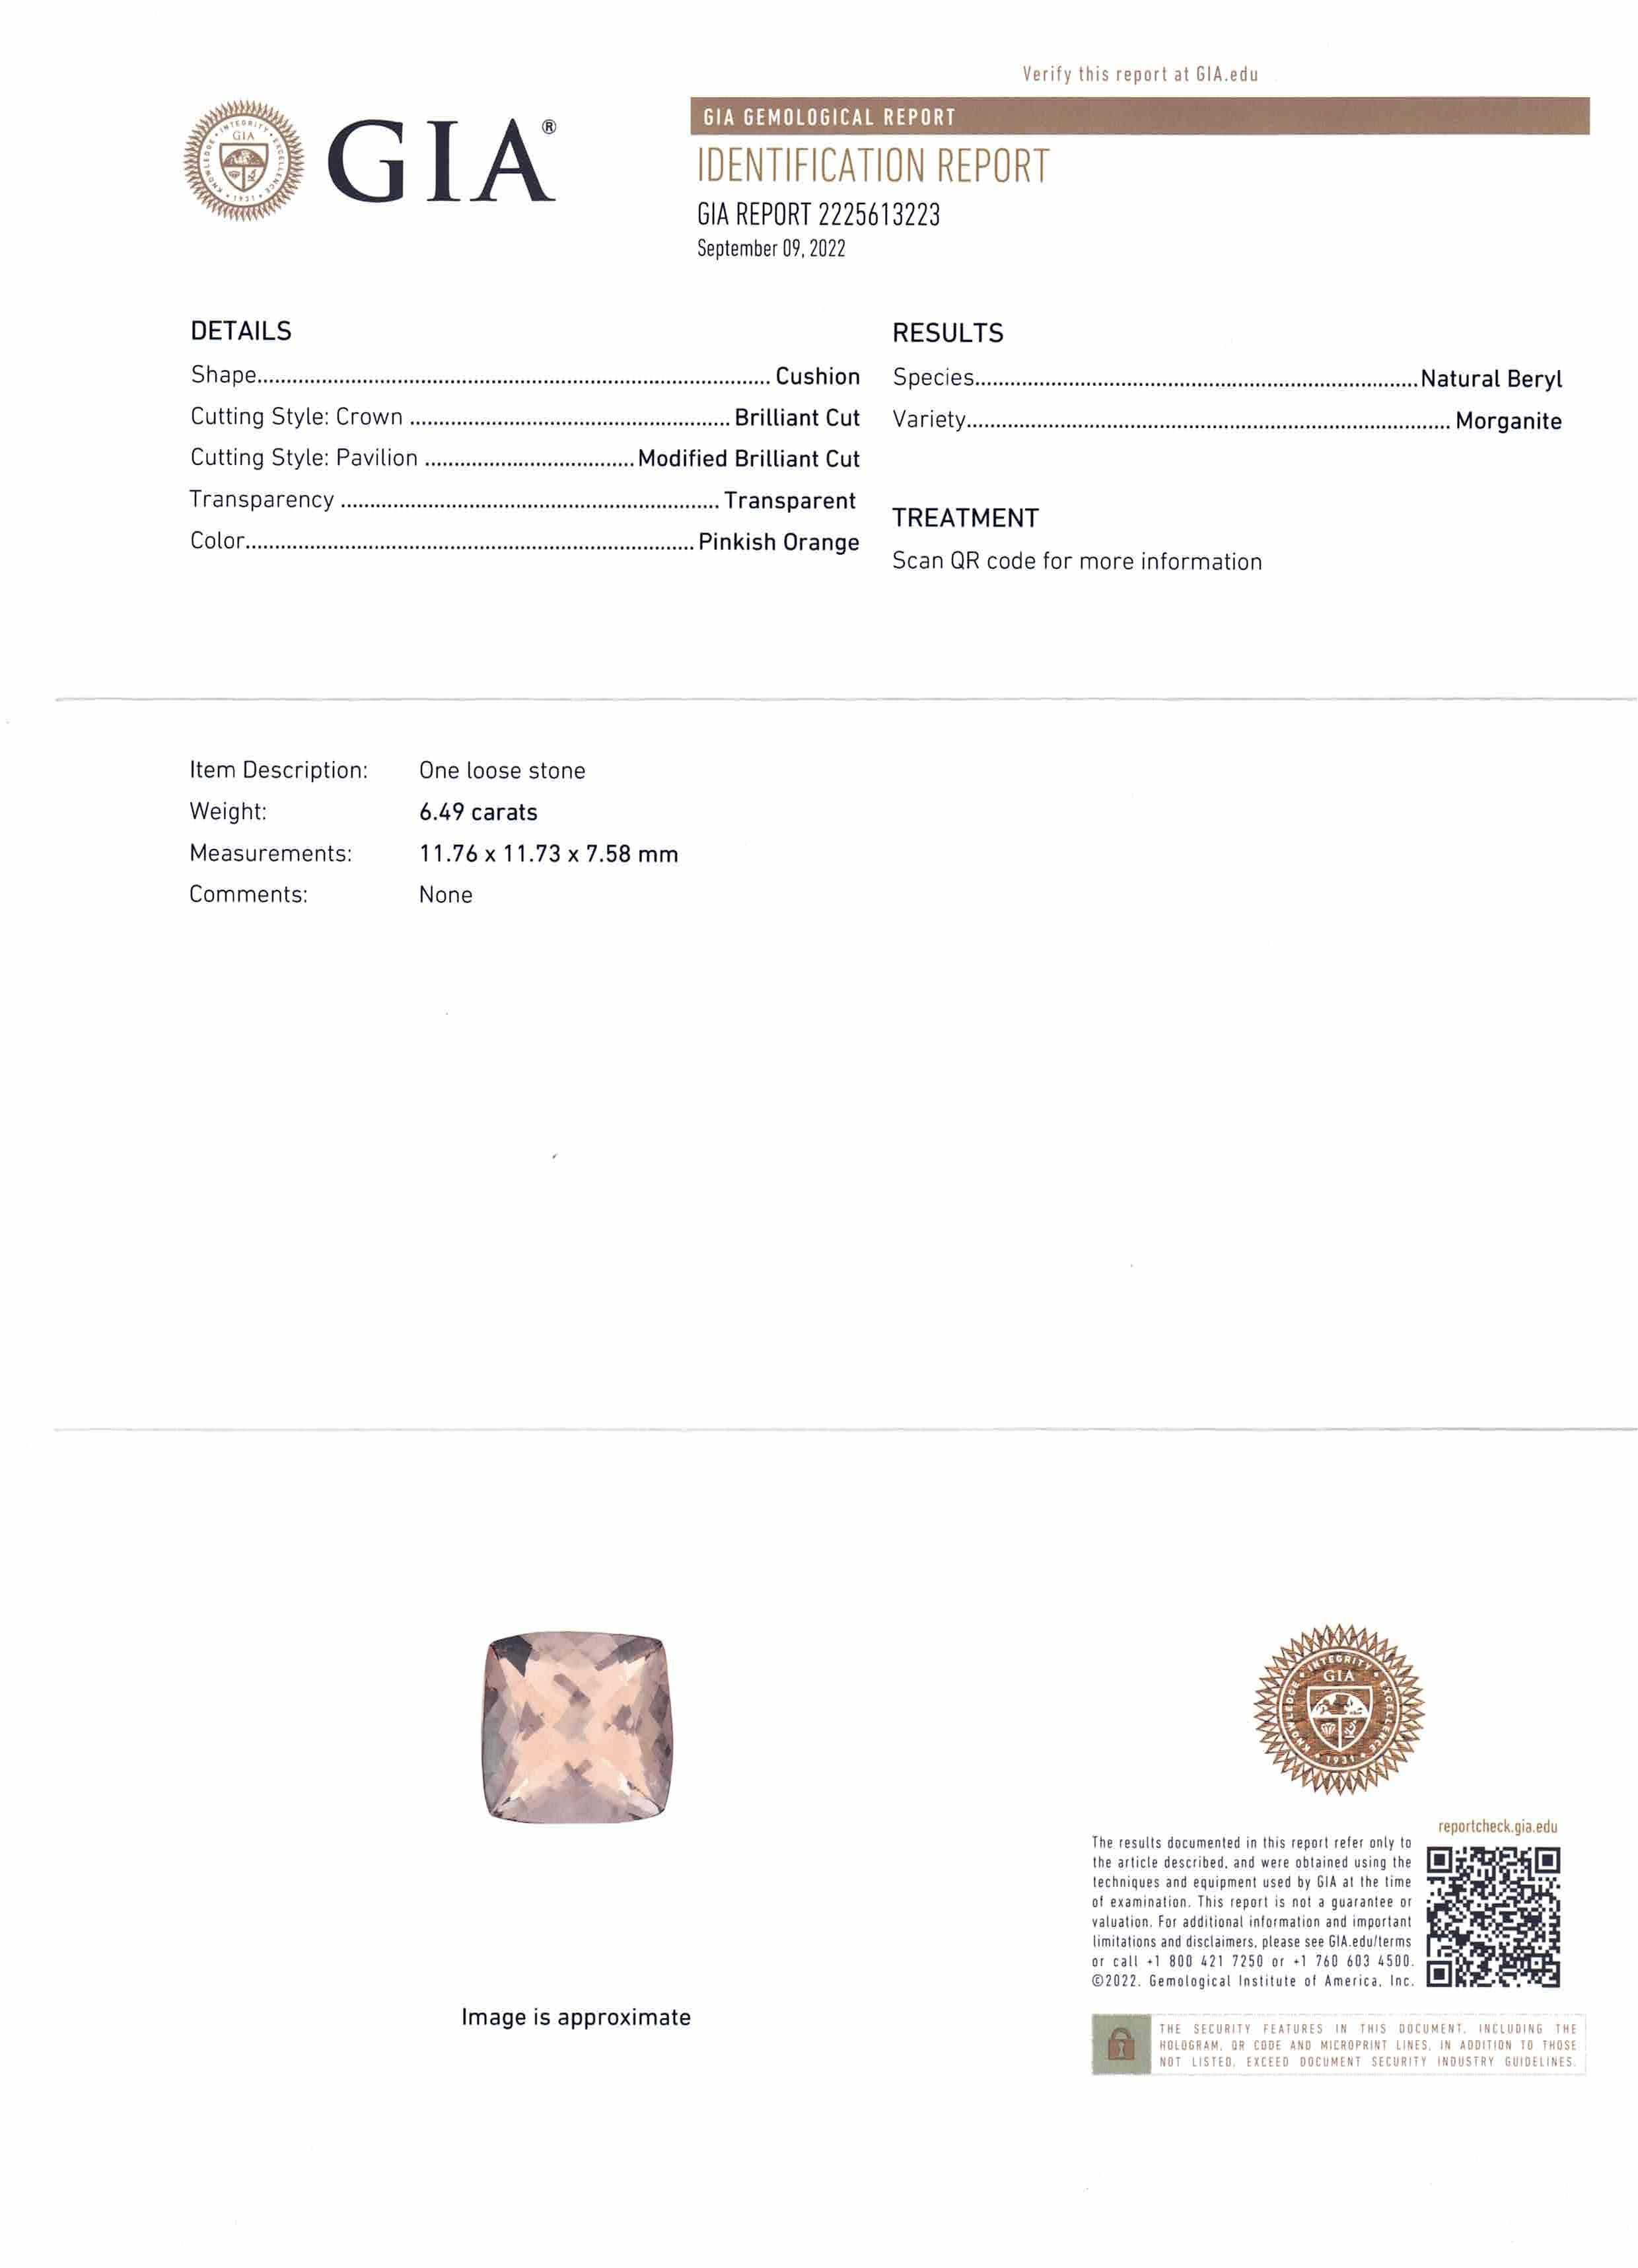 This is a stunning GIA Certified Morganite

 

The GIA report reads as follows:

GIA Report Number: 2225613223
Shape: Cushion
Cutting Style:
Cutting Style: Crown: Brilliant Cut
Cutting Style: Pavilion: Modified Brilliant Cut
Transparency: